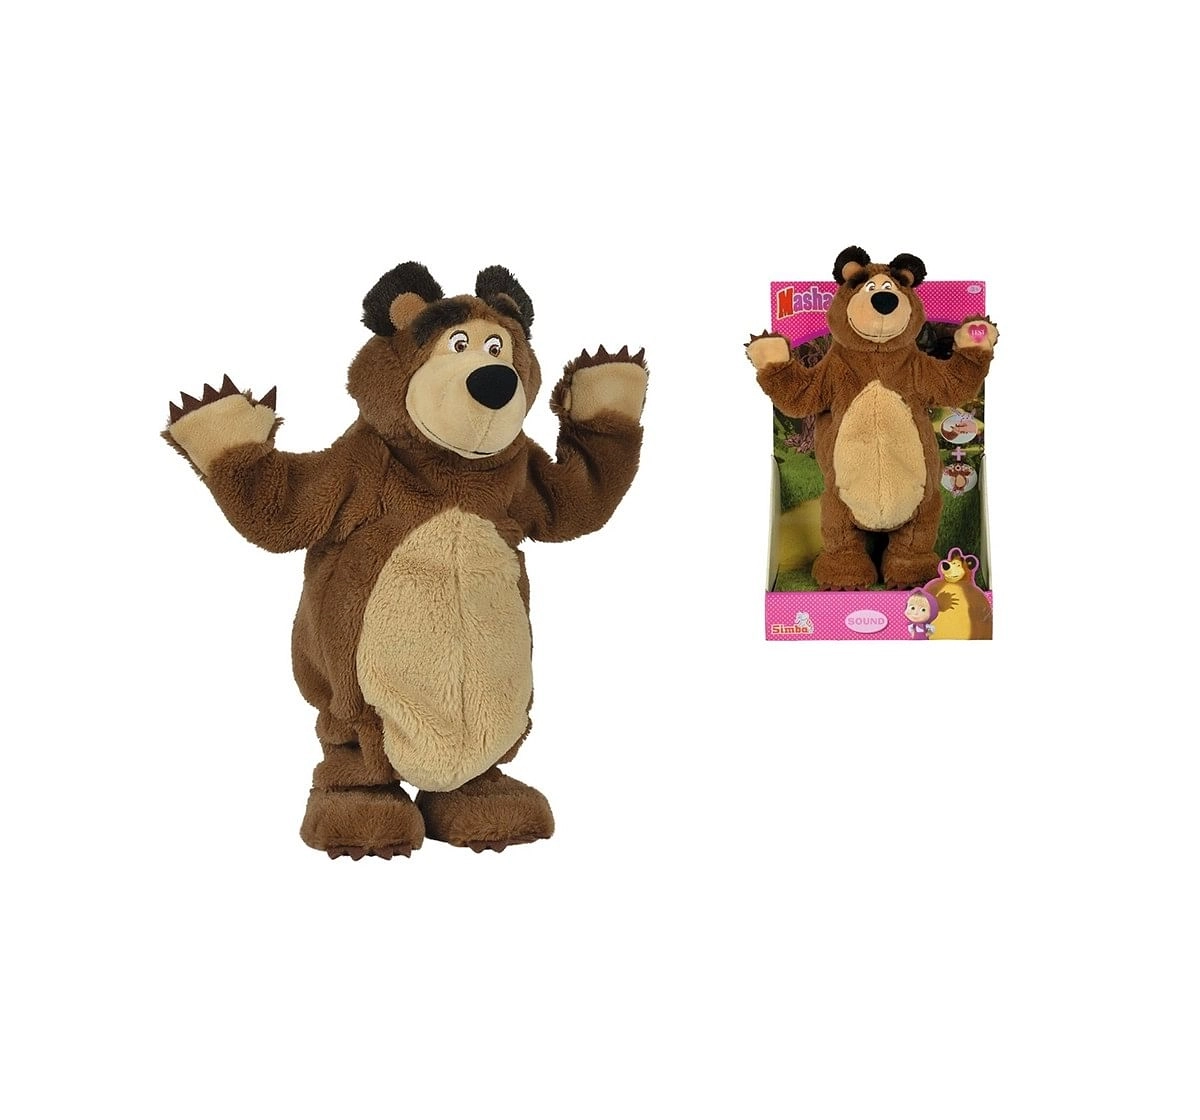 Simba Masha Plush Bear With Music Fun Interactive Soft Toys for Kids age 3Y+ - 34 Cm (Brown)